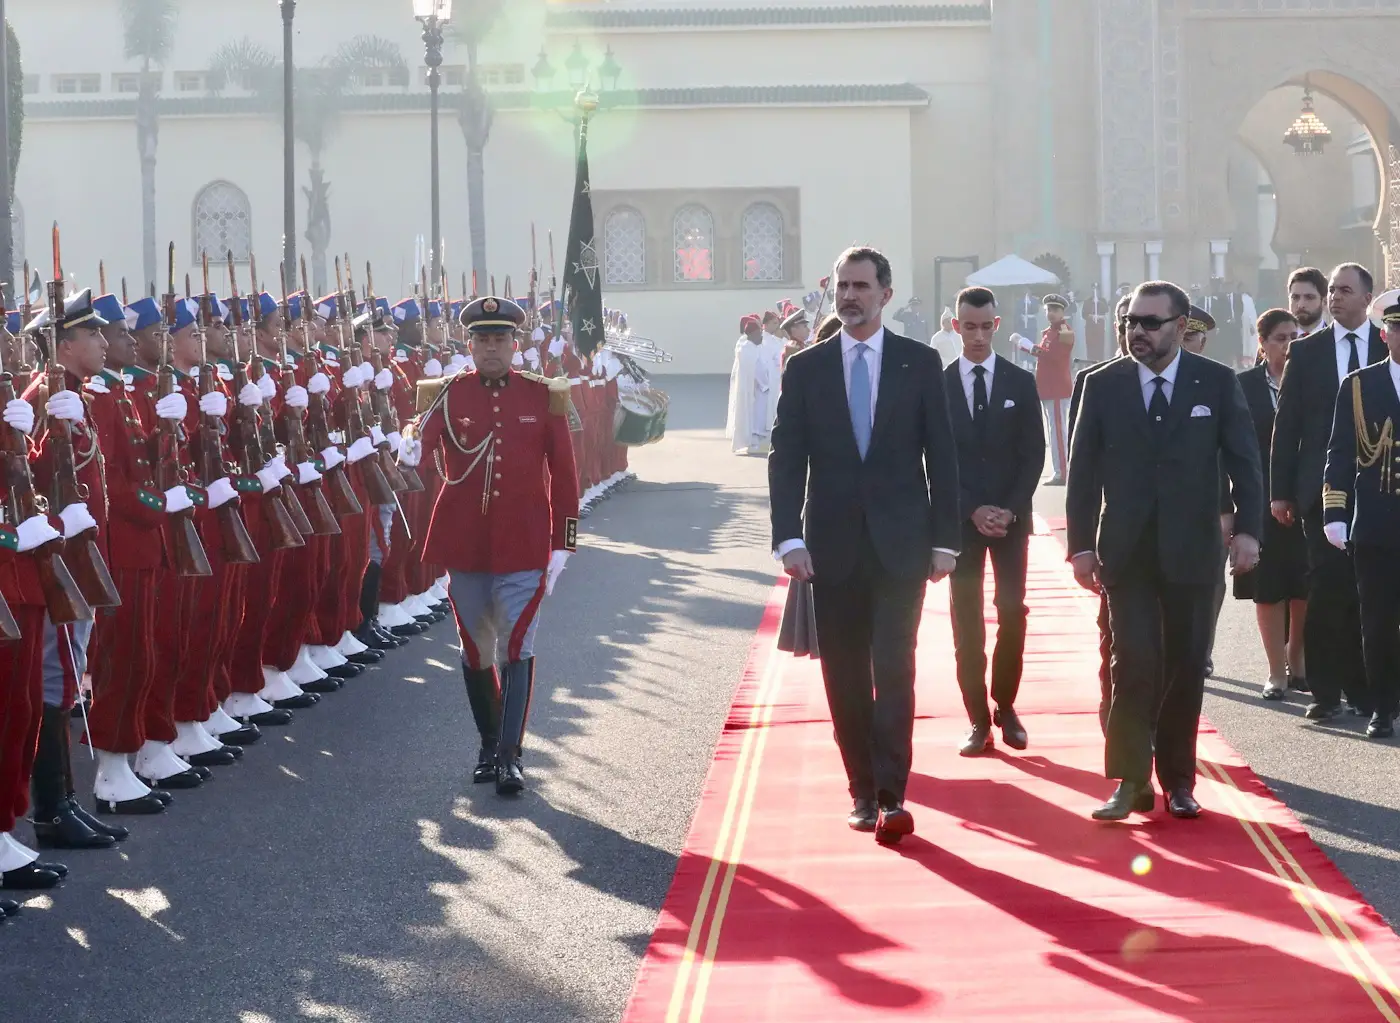 Queen Letizia and King Felipe of Spain started Morocco Visit